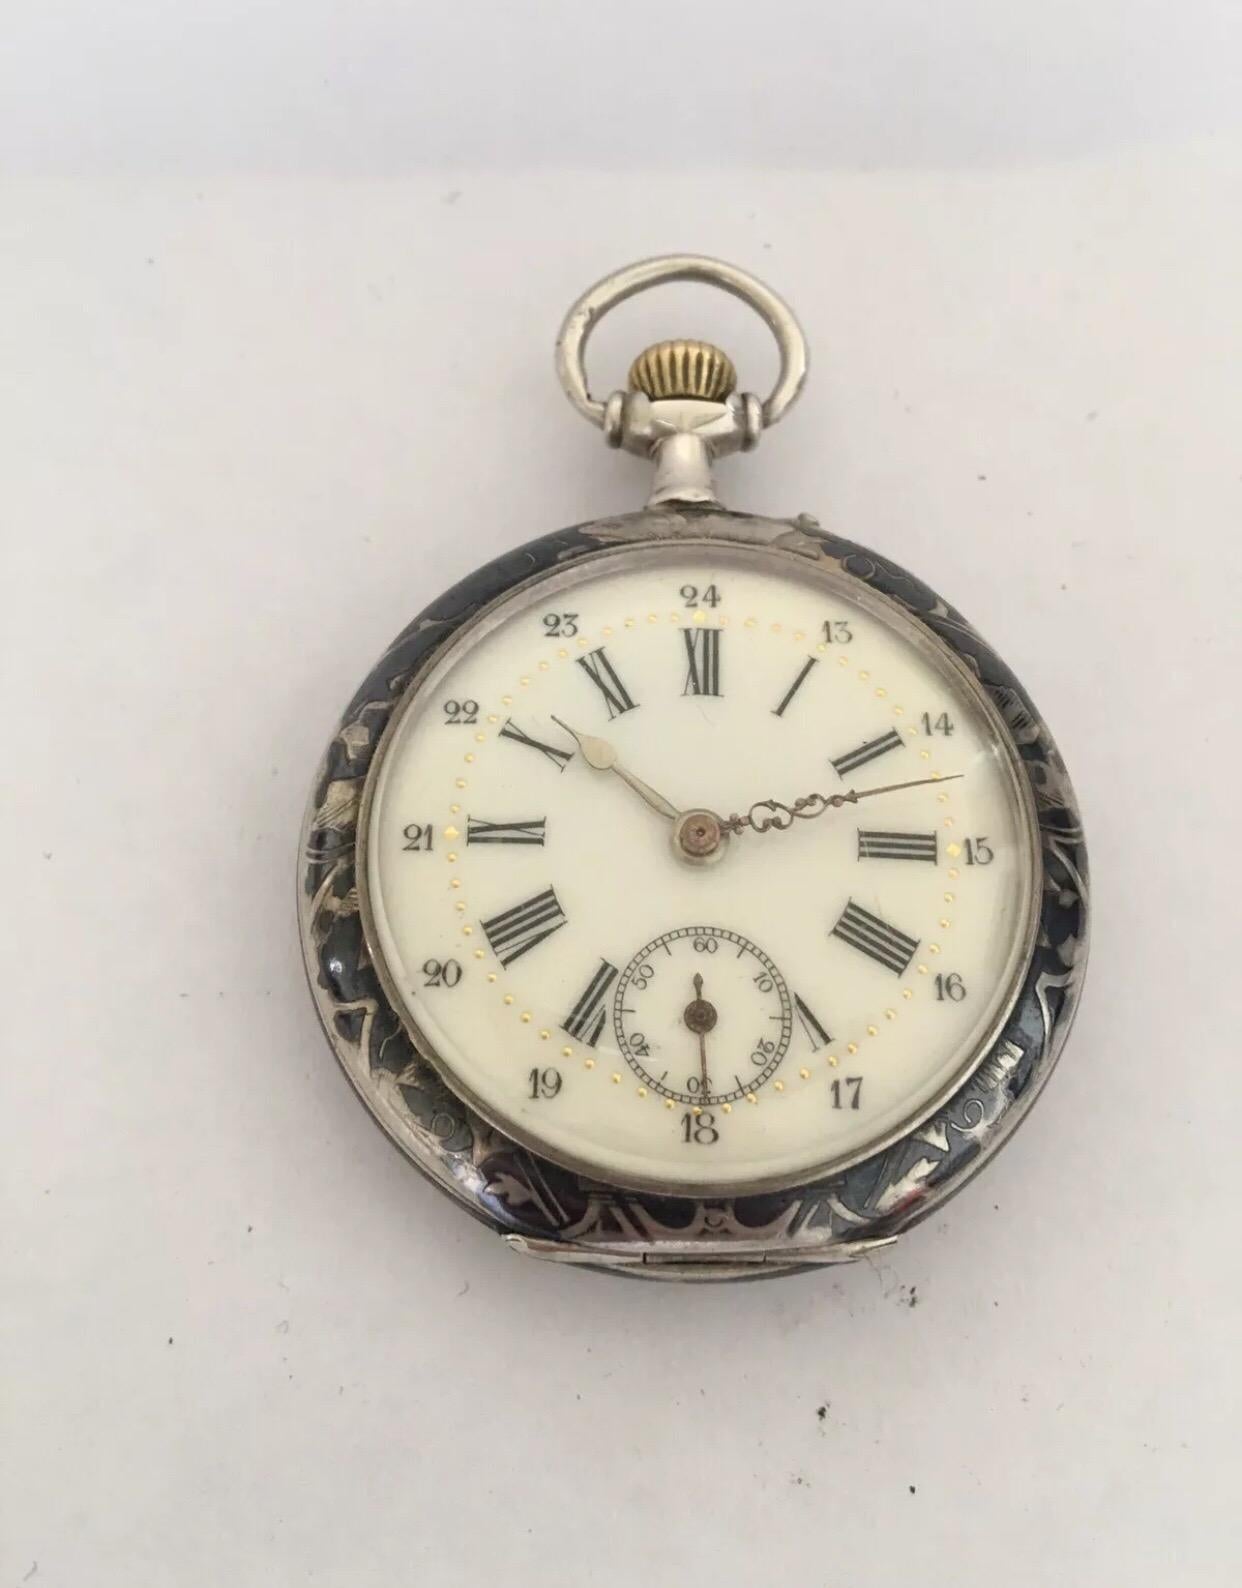 
Antique Silver (niello) Engraved Cased Pocket Watch.


This beautiful niello watch is in good working condition and it has been serviced. It runs well.